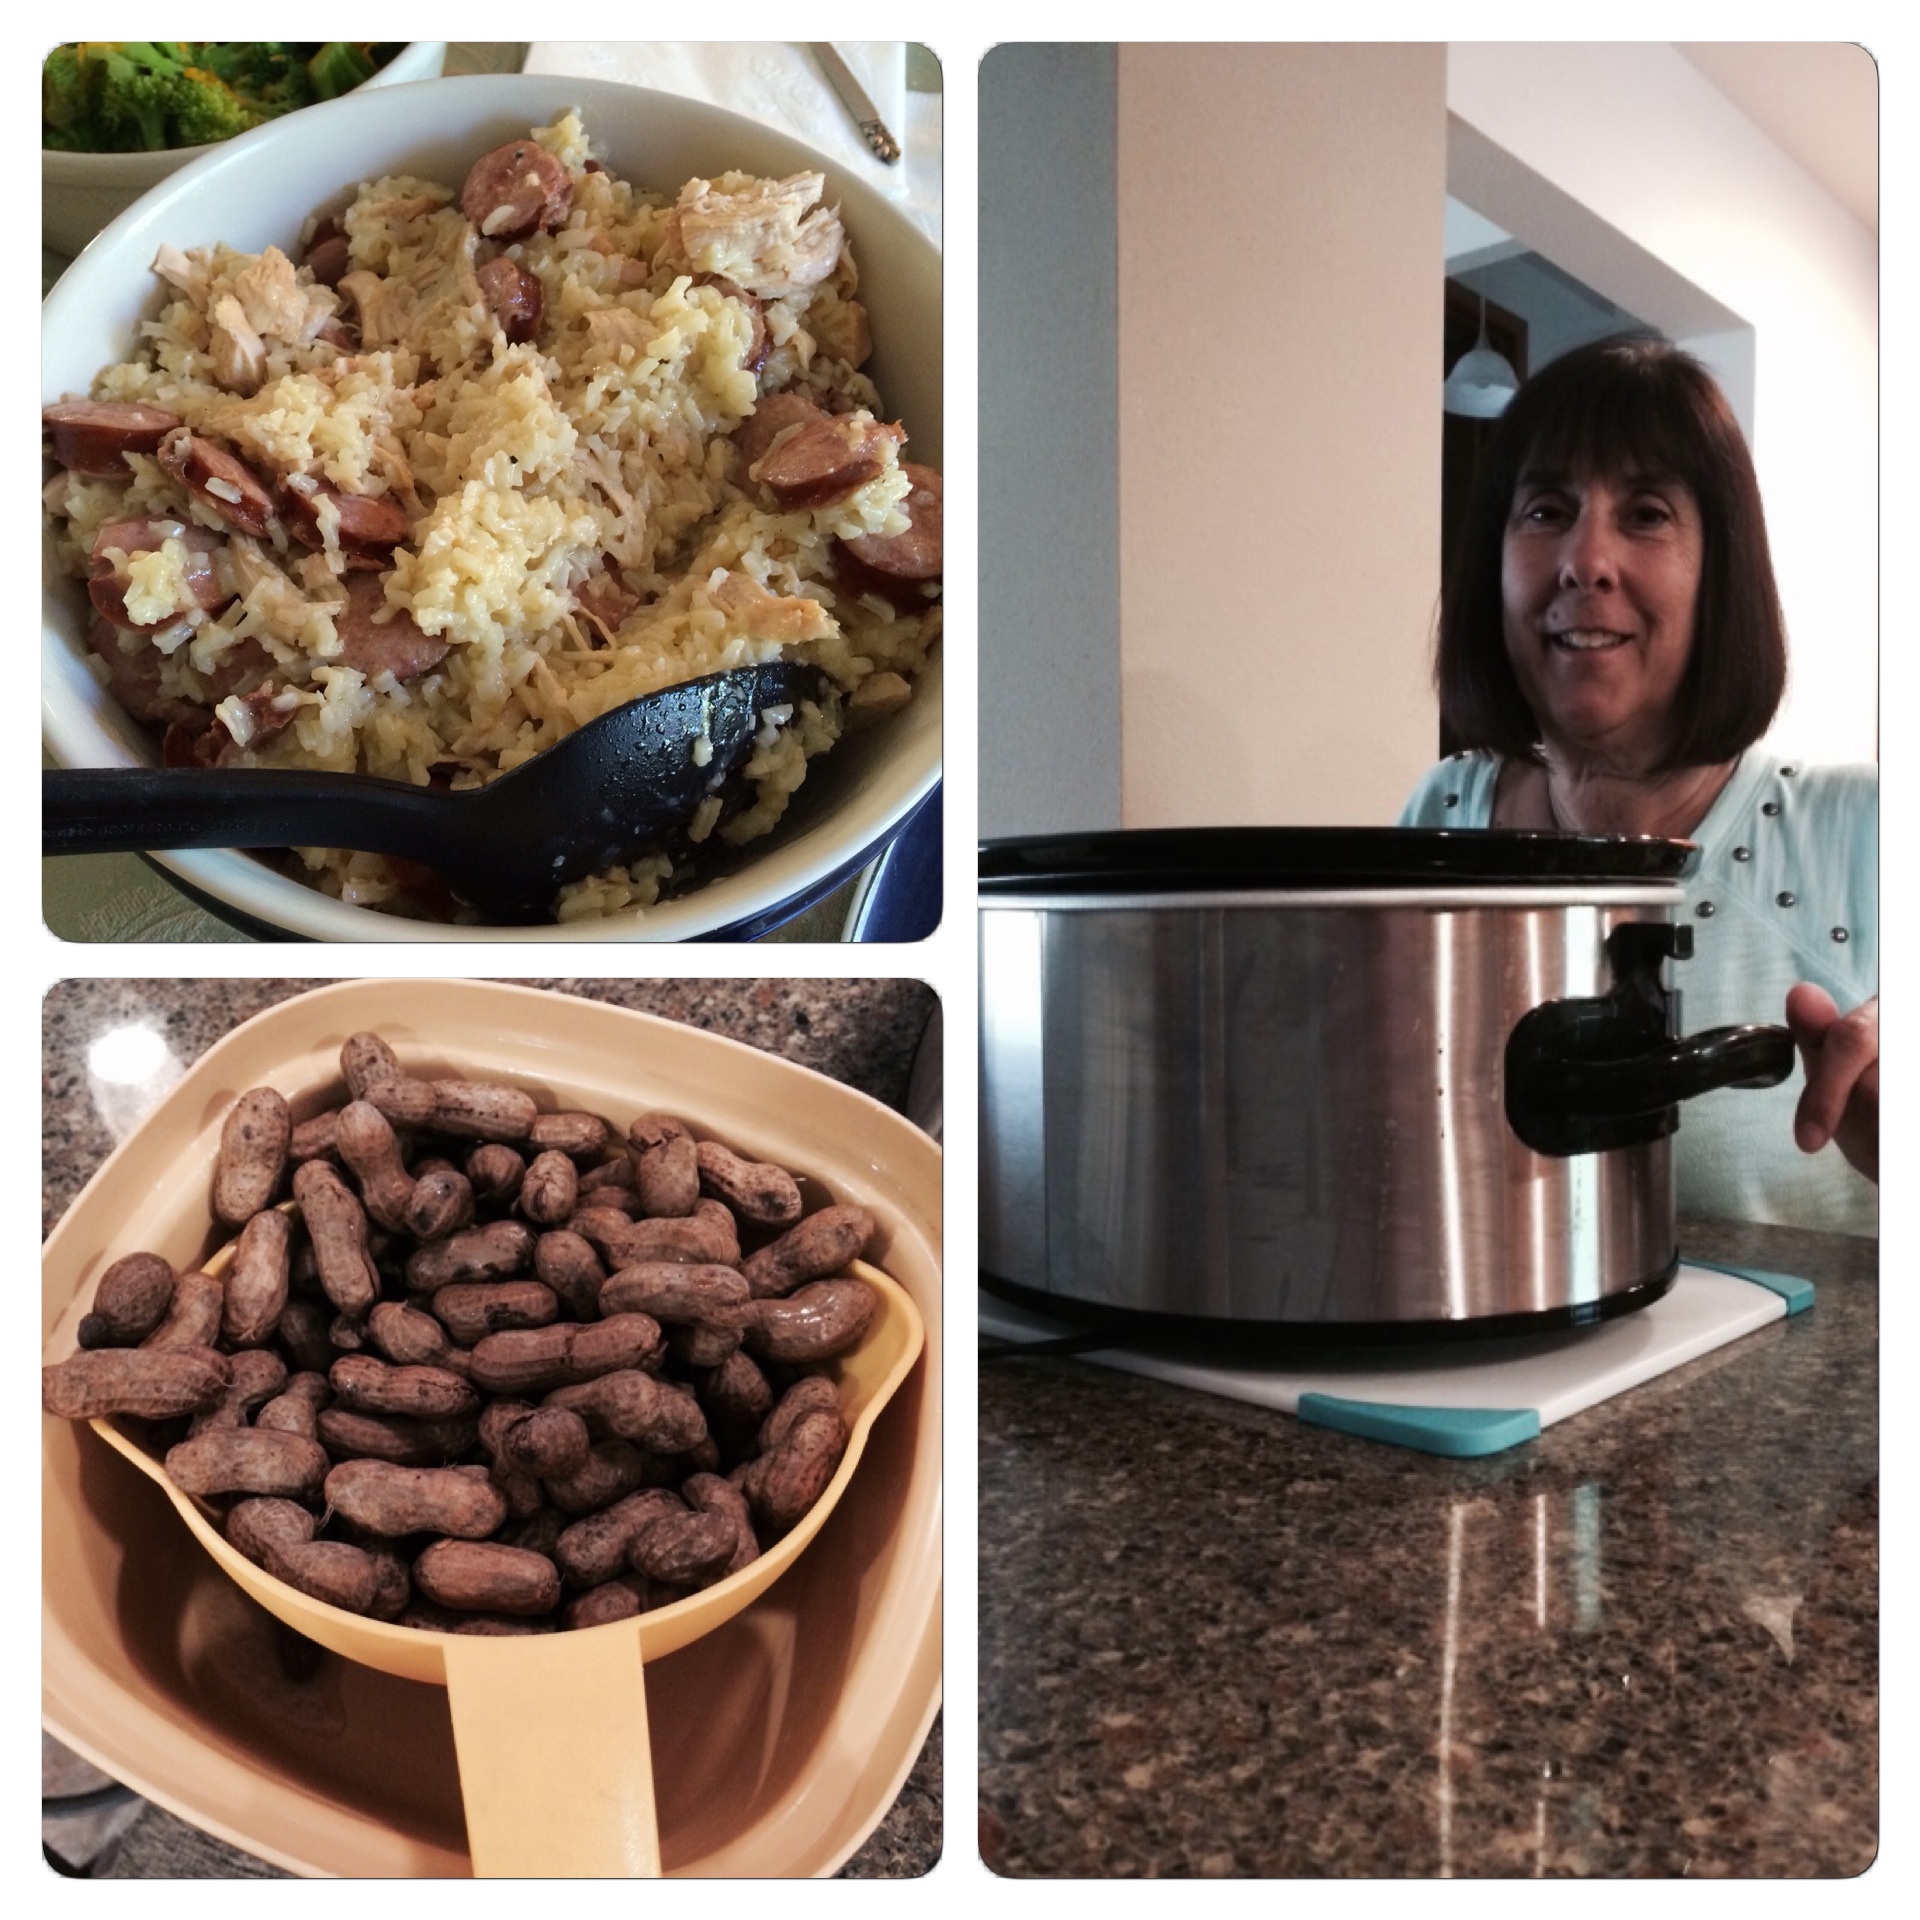 The delicious southern treats we enjoyed over the past few days. Up top is chicken bog, below are boiled peanuts, and the photo on the right is my mom by the crock pot.